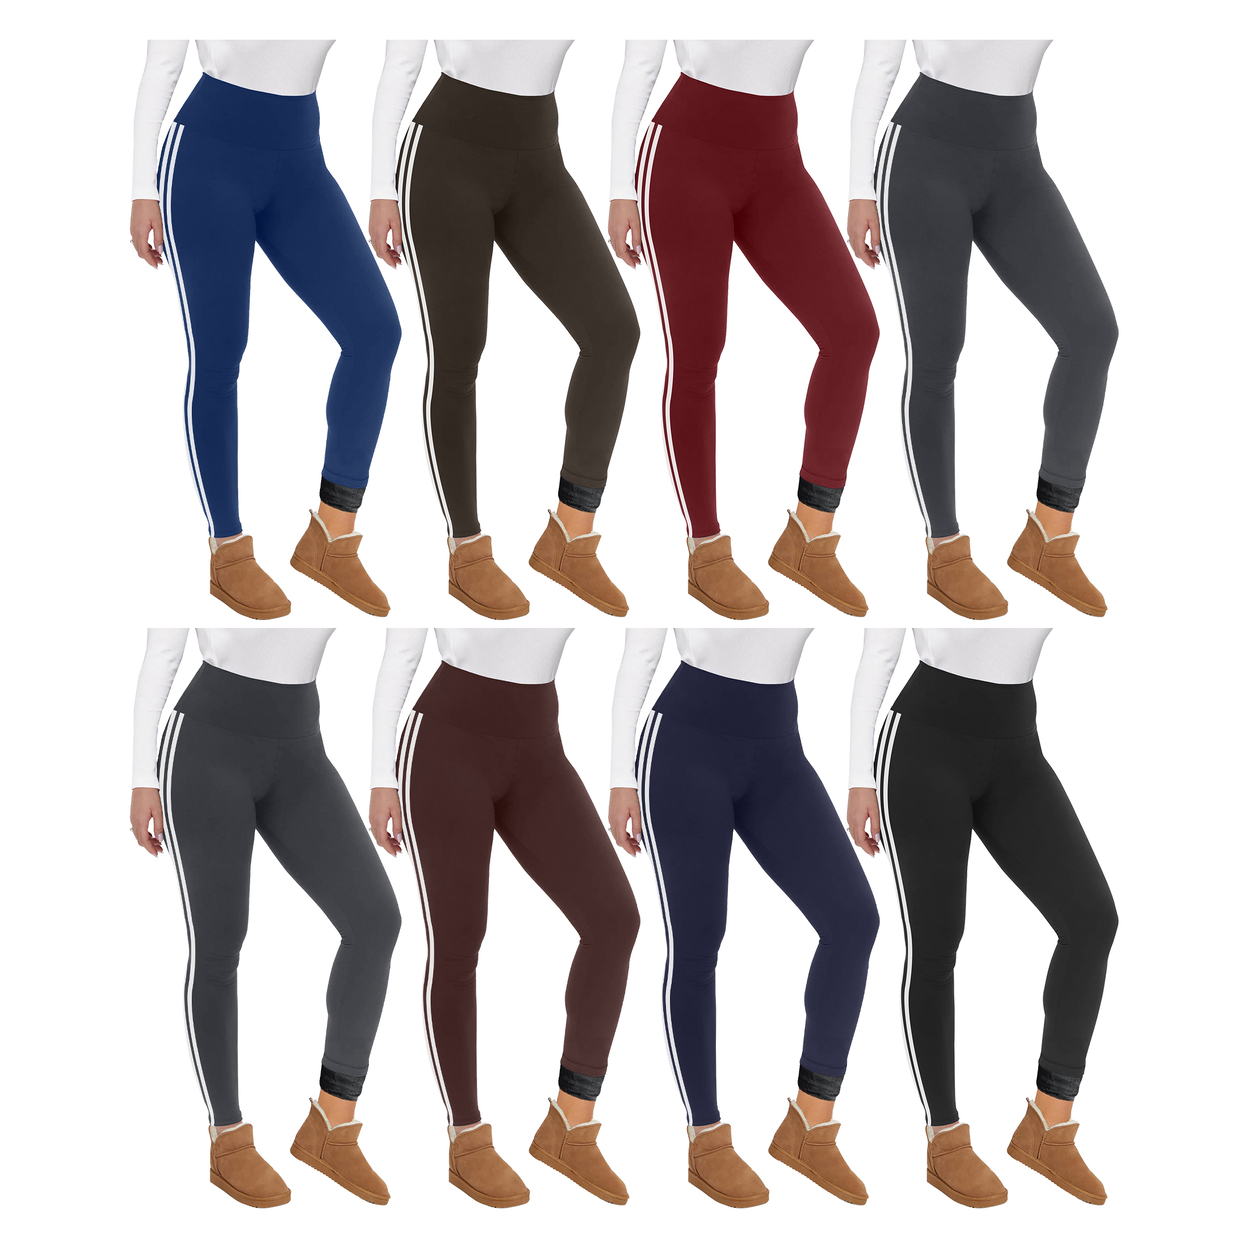 4-Pack: Women's Ultra Soft Winter Warm Cozy Striped Fur Lined Yoga Leggings - Assorted, Small